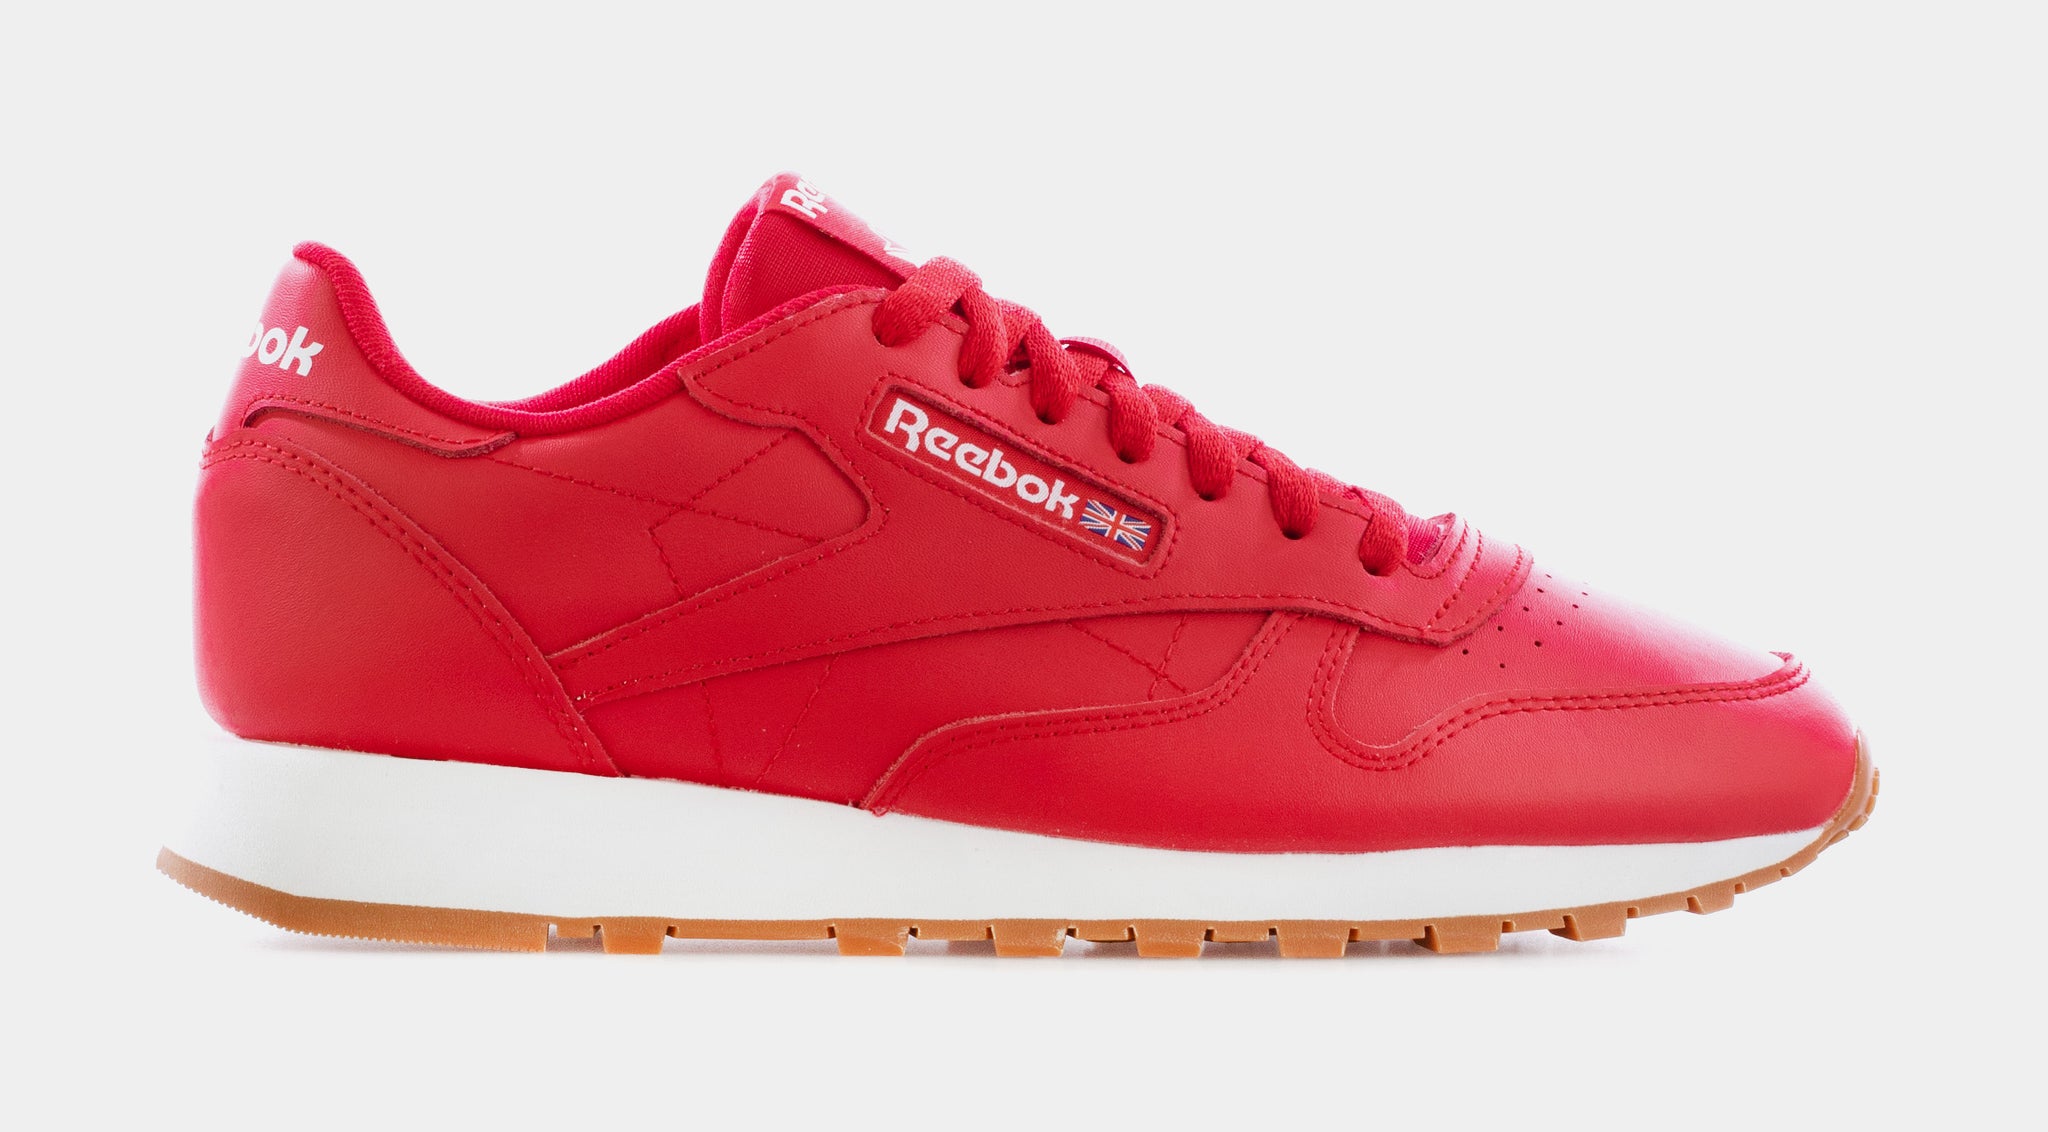 Reebok Classic Leather Mens Lifestyle GY3601 – Shoes Shoe Red Palace